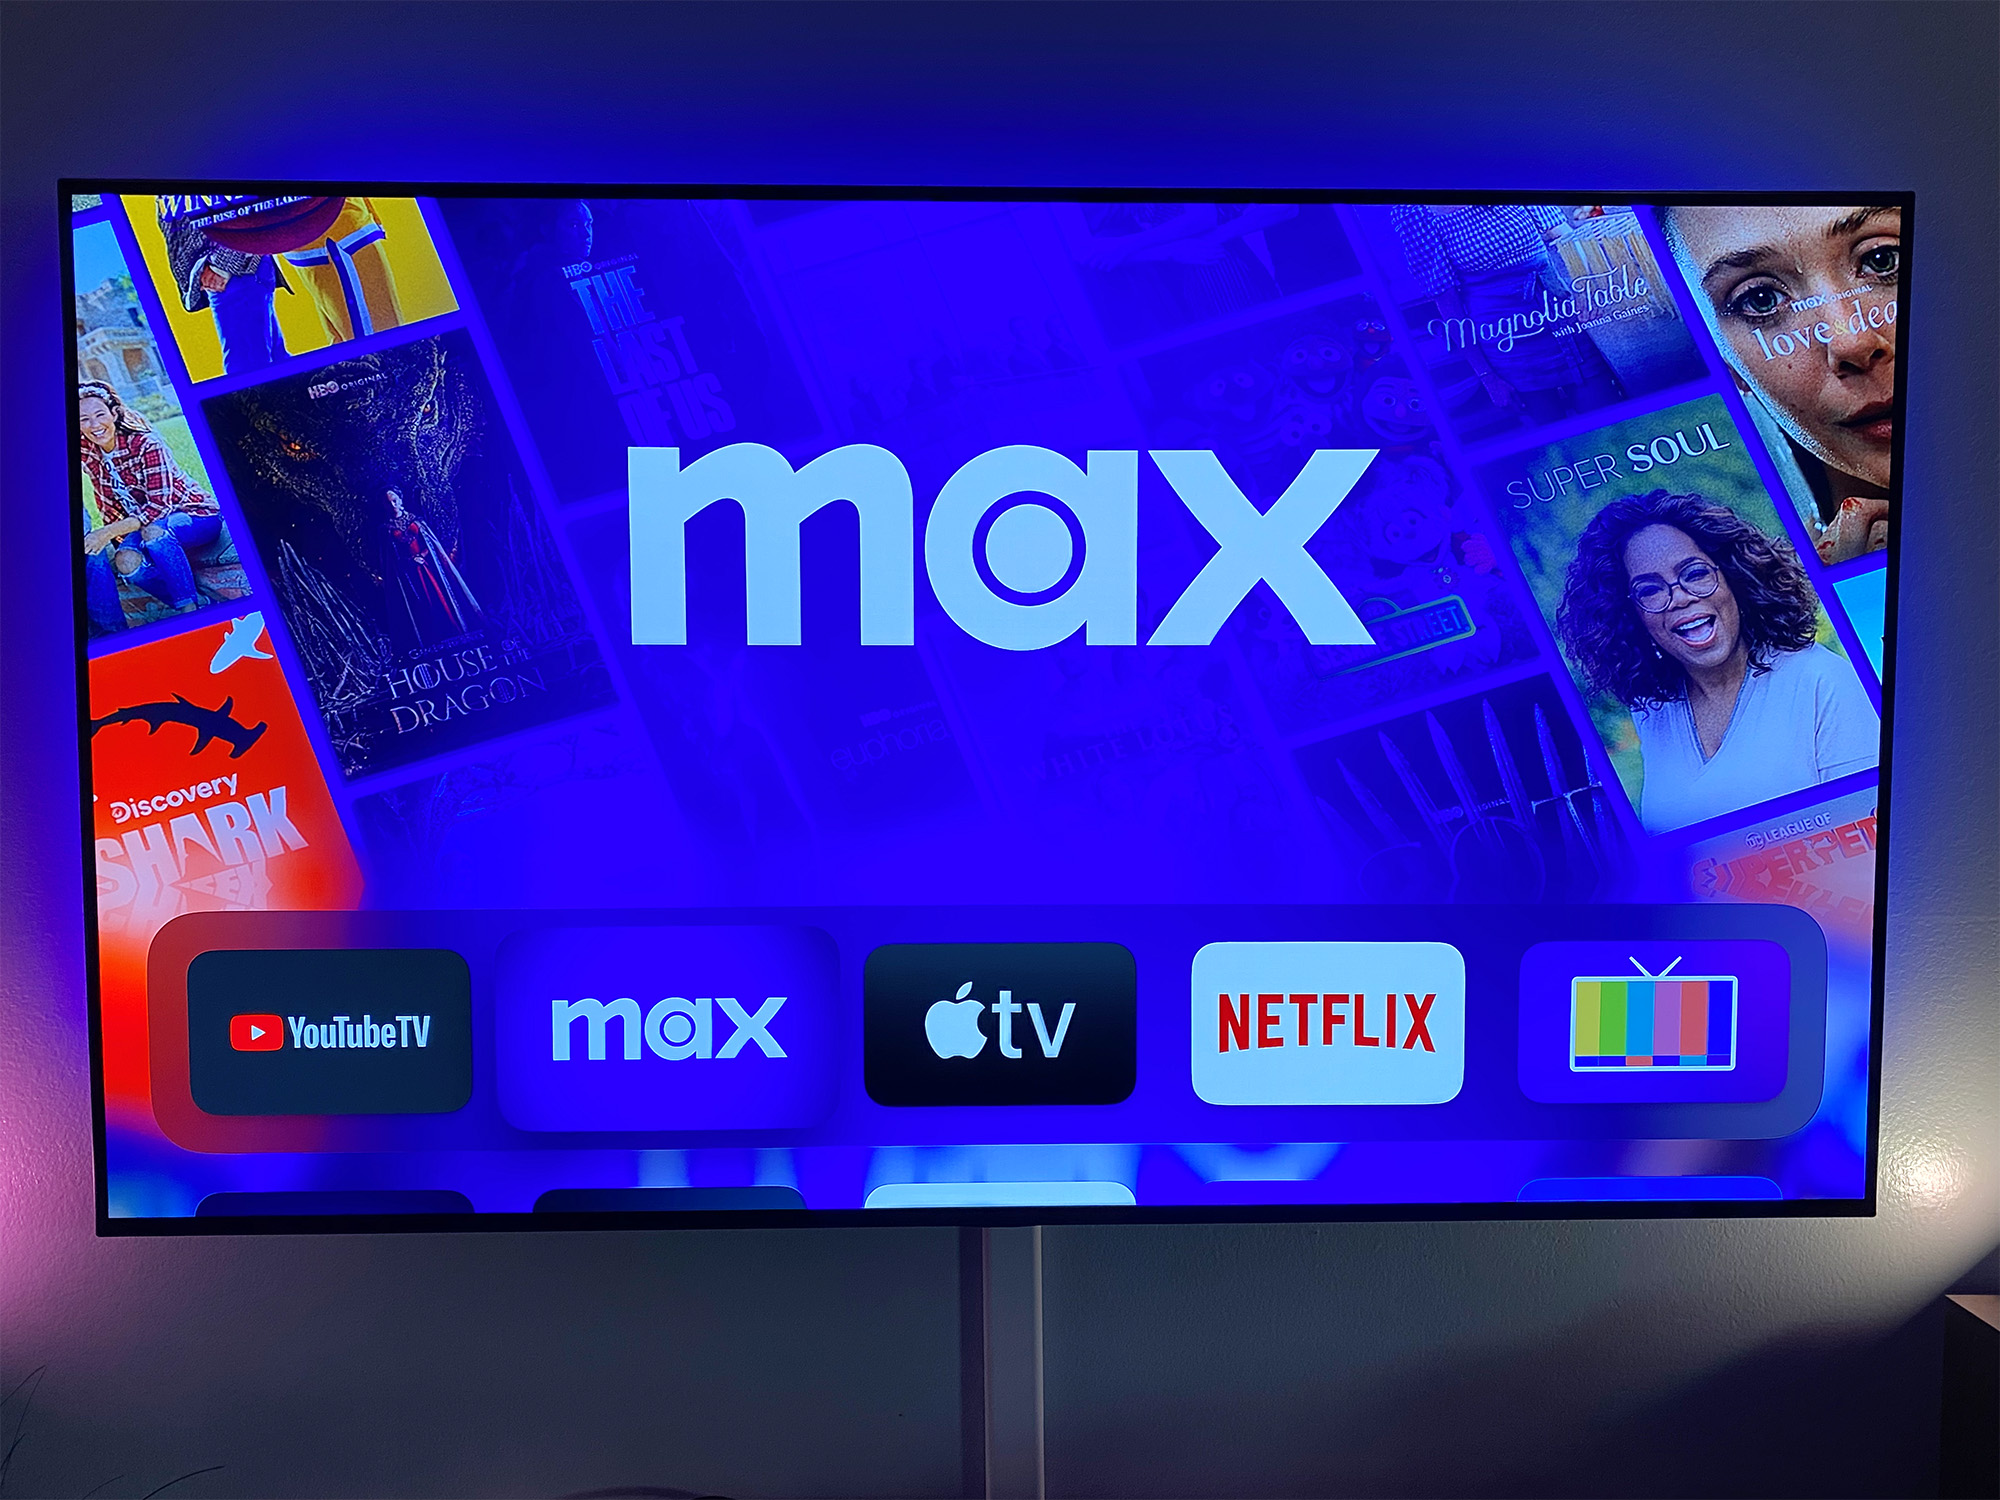 HBO Max now Max: lacks native video player features; 'Up Next' support bugs  - 9to5Mac